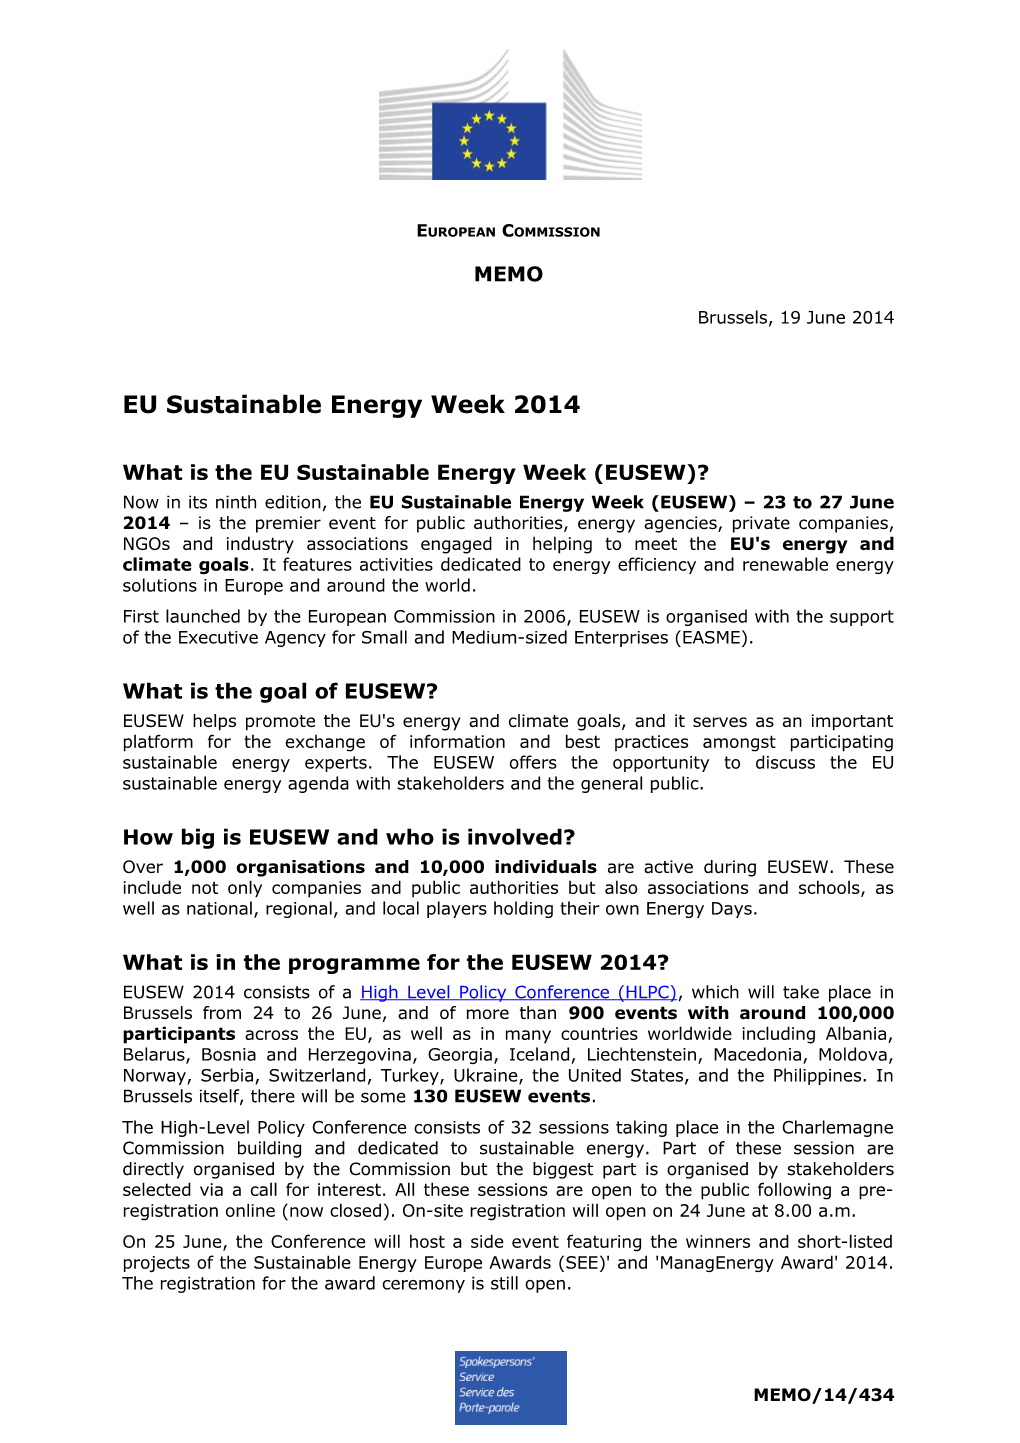 What Is the EU Sustainable Energy Week (EUSEW)?